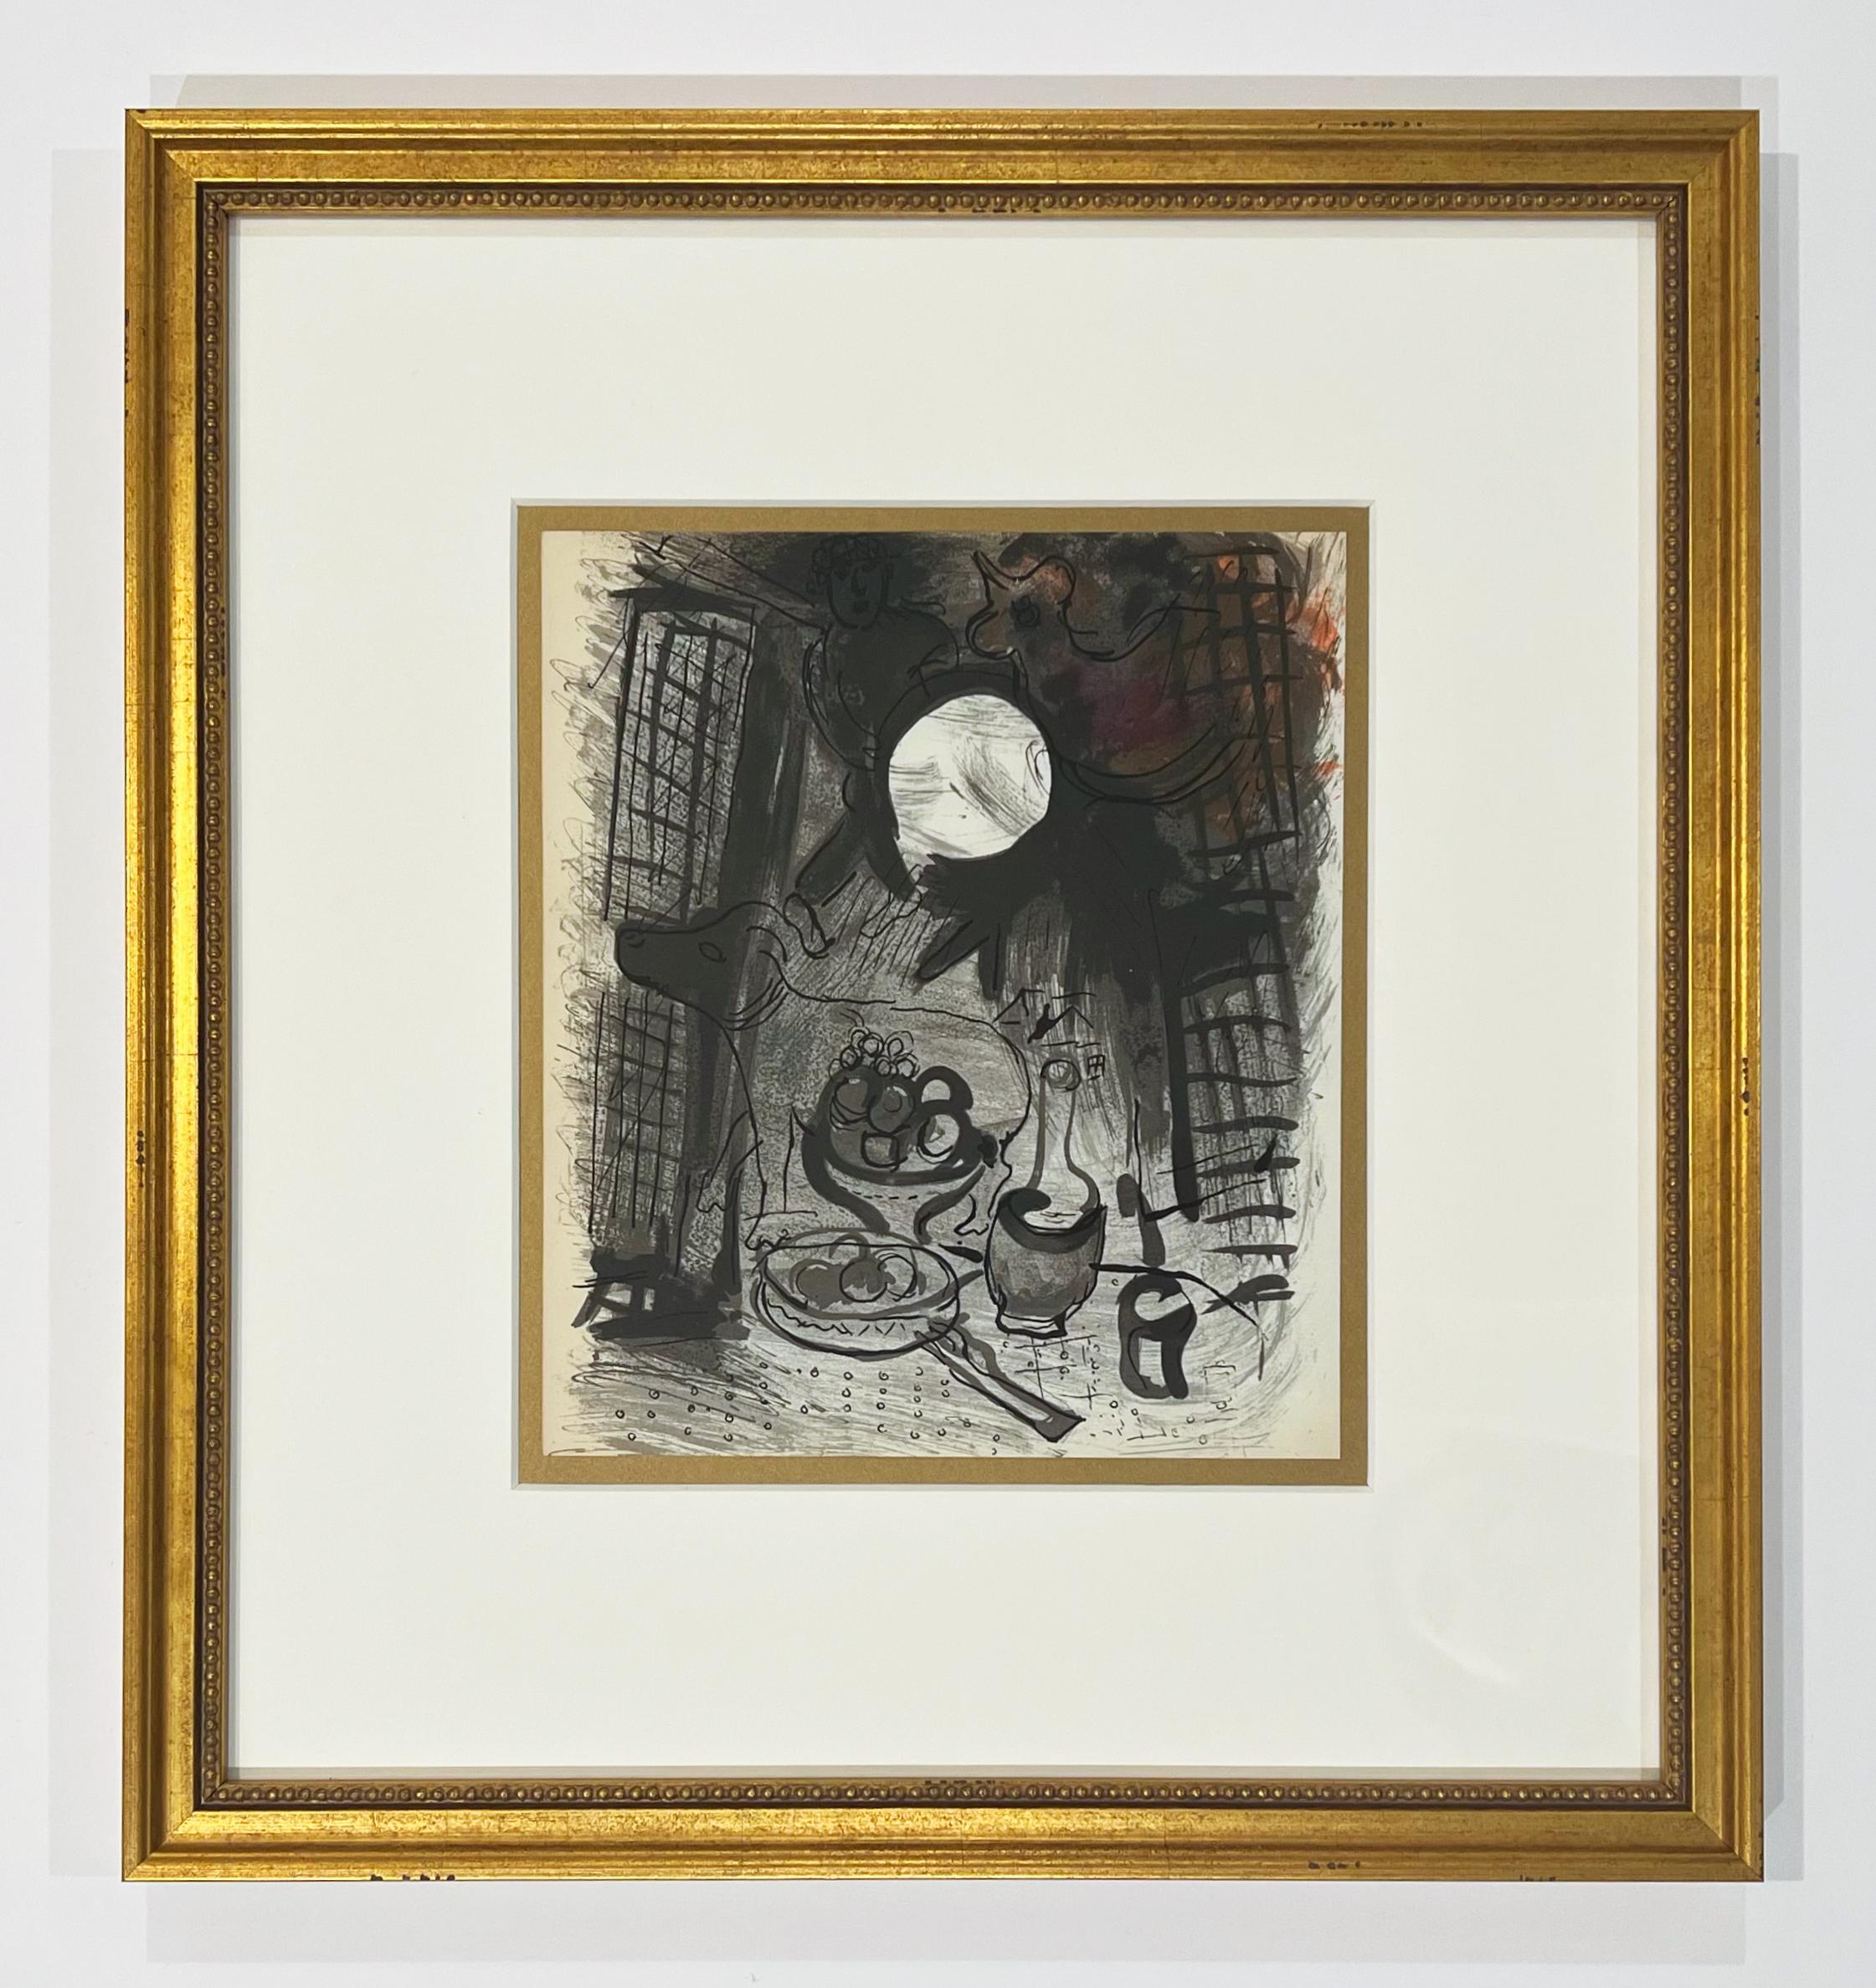 Brown Still Life from Chagall by Jacques Lassaigne - Print by Marc Chagall